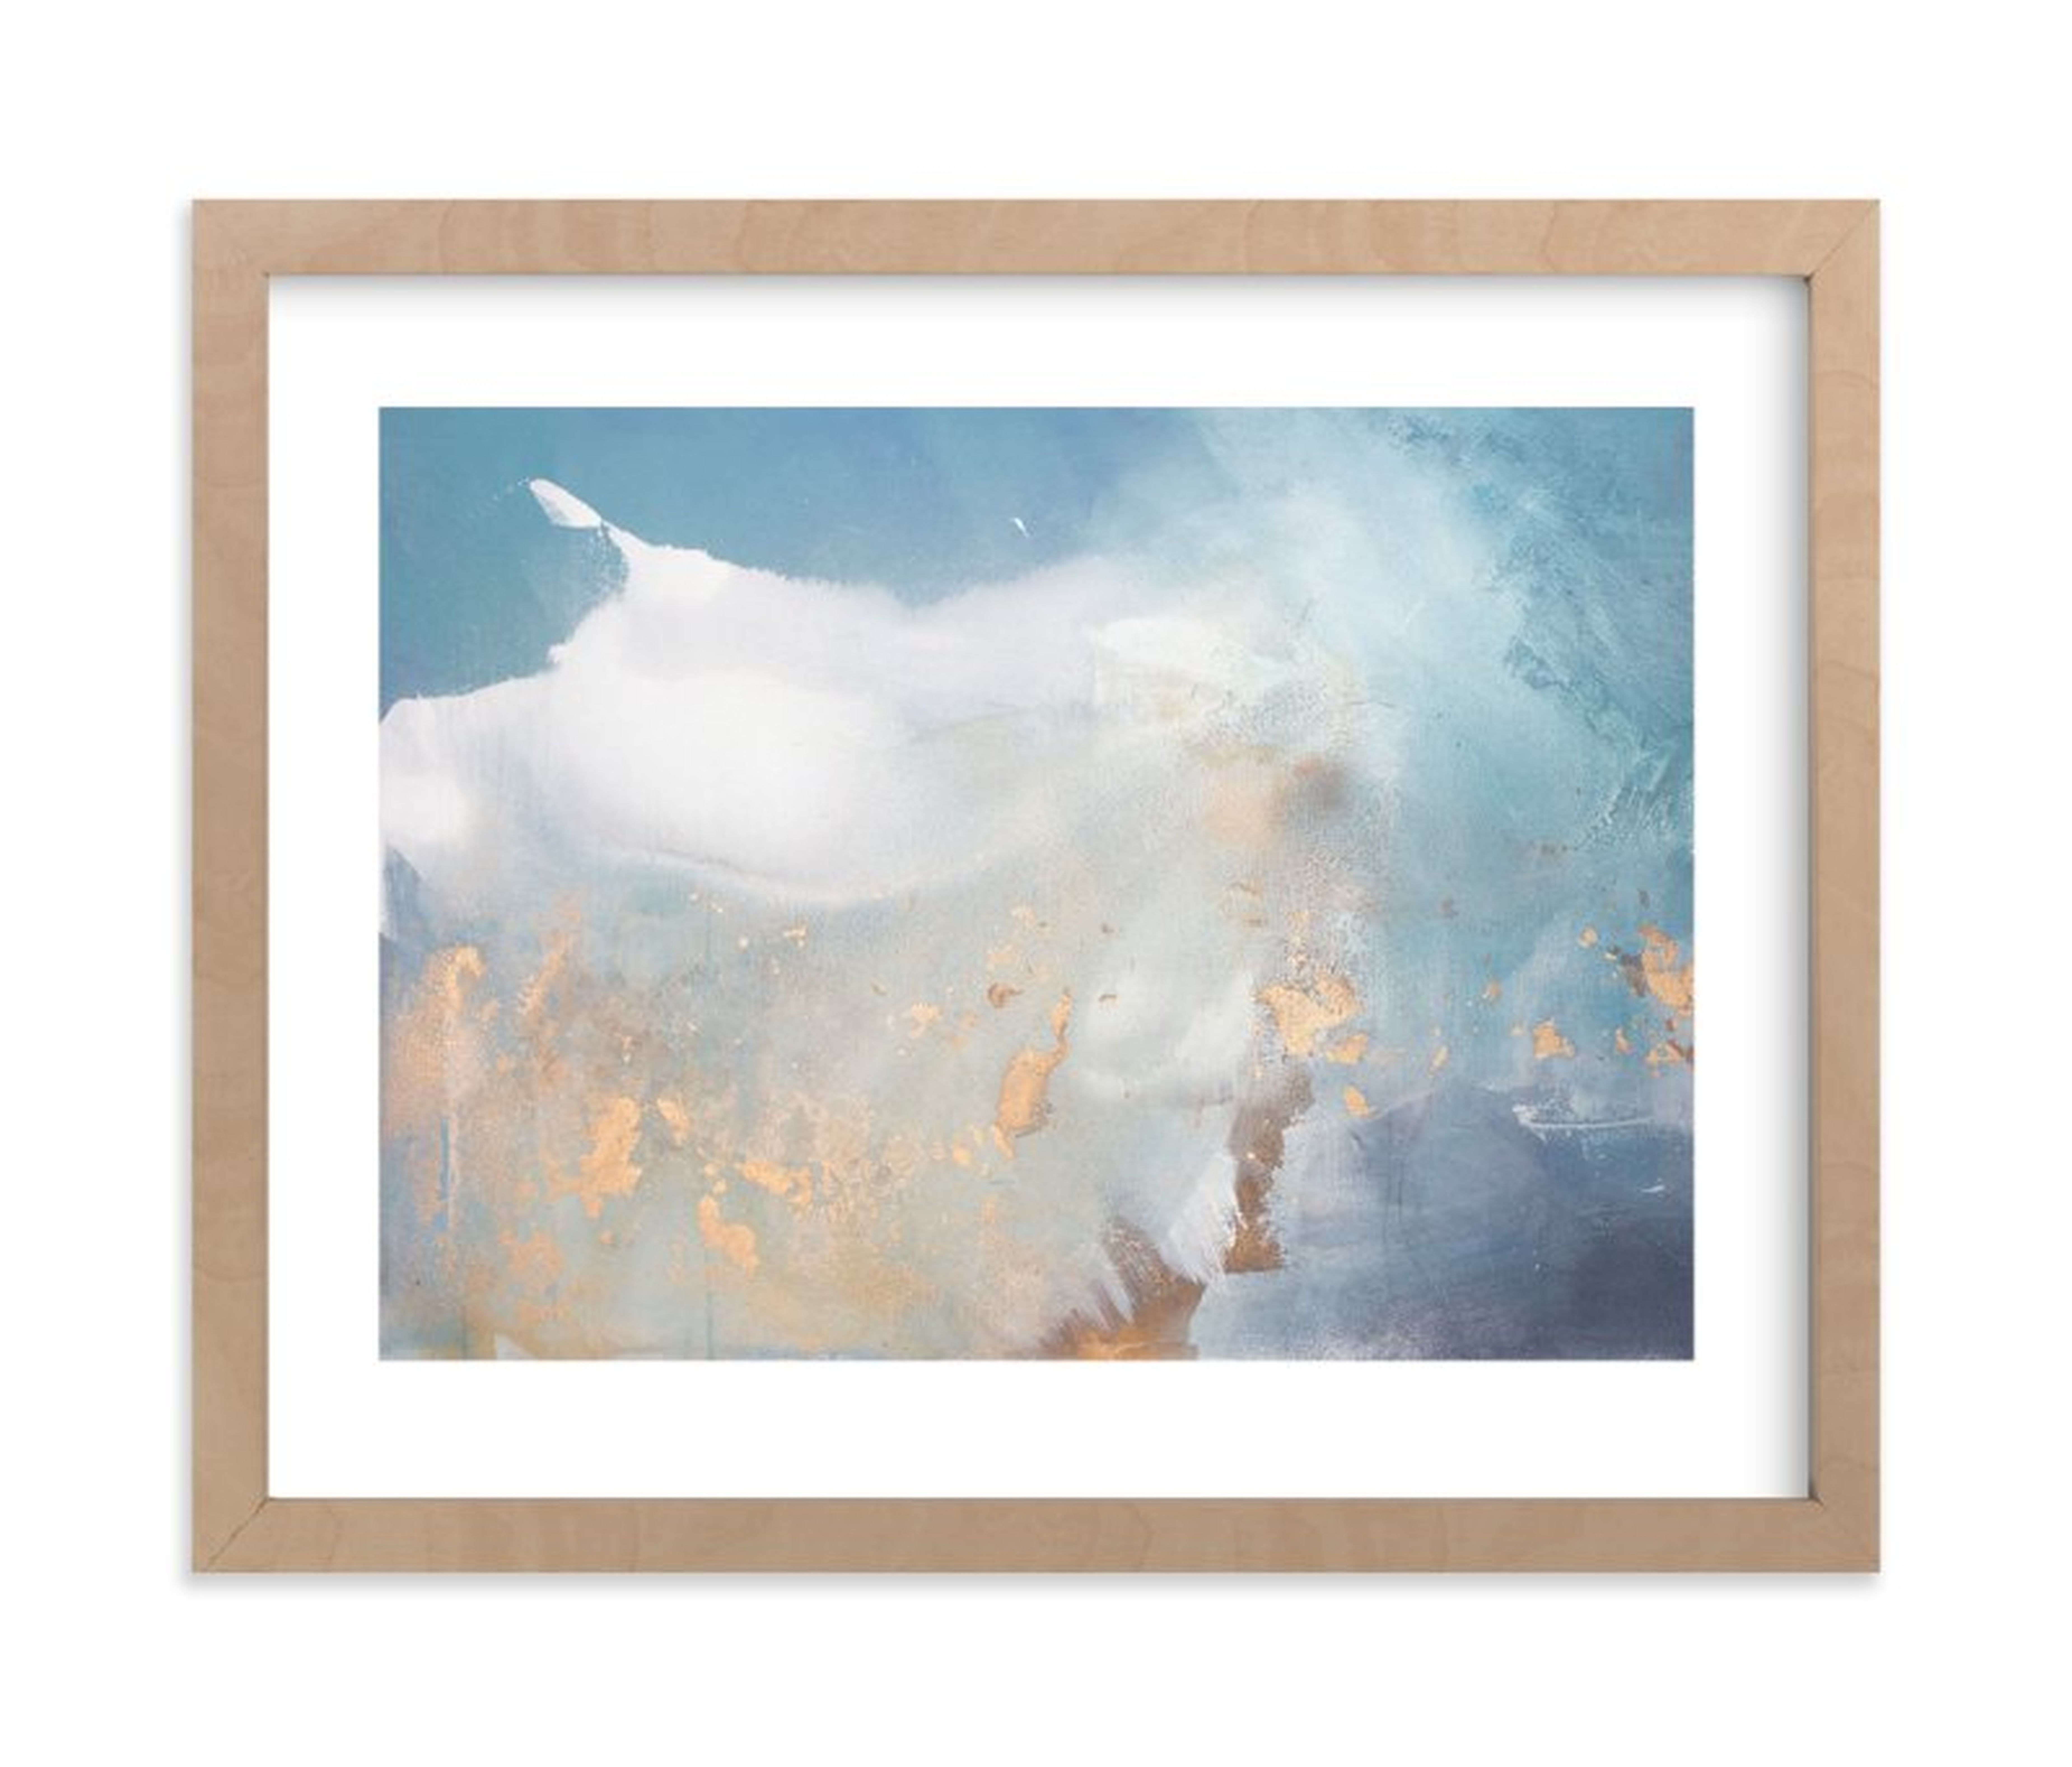 Undertow - Horizontal - 10x8 Natural Raw Wood Frame - Minted